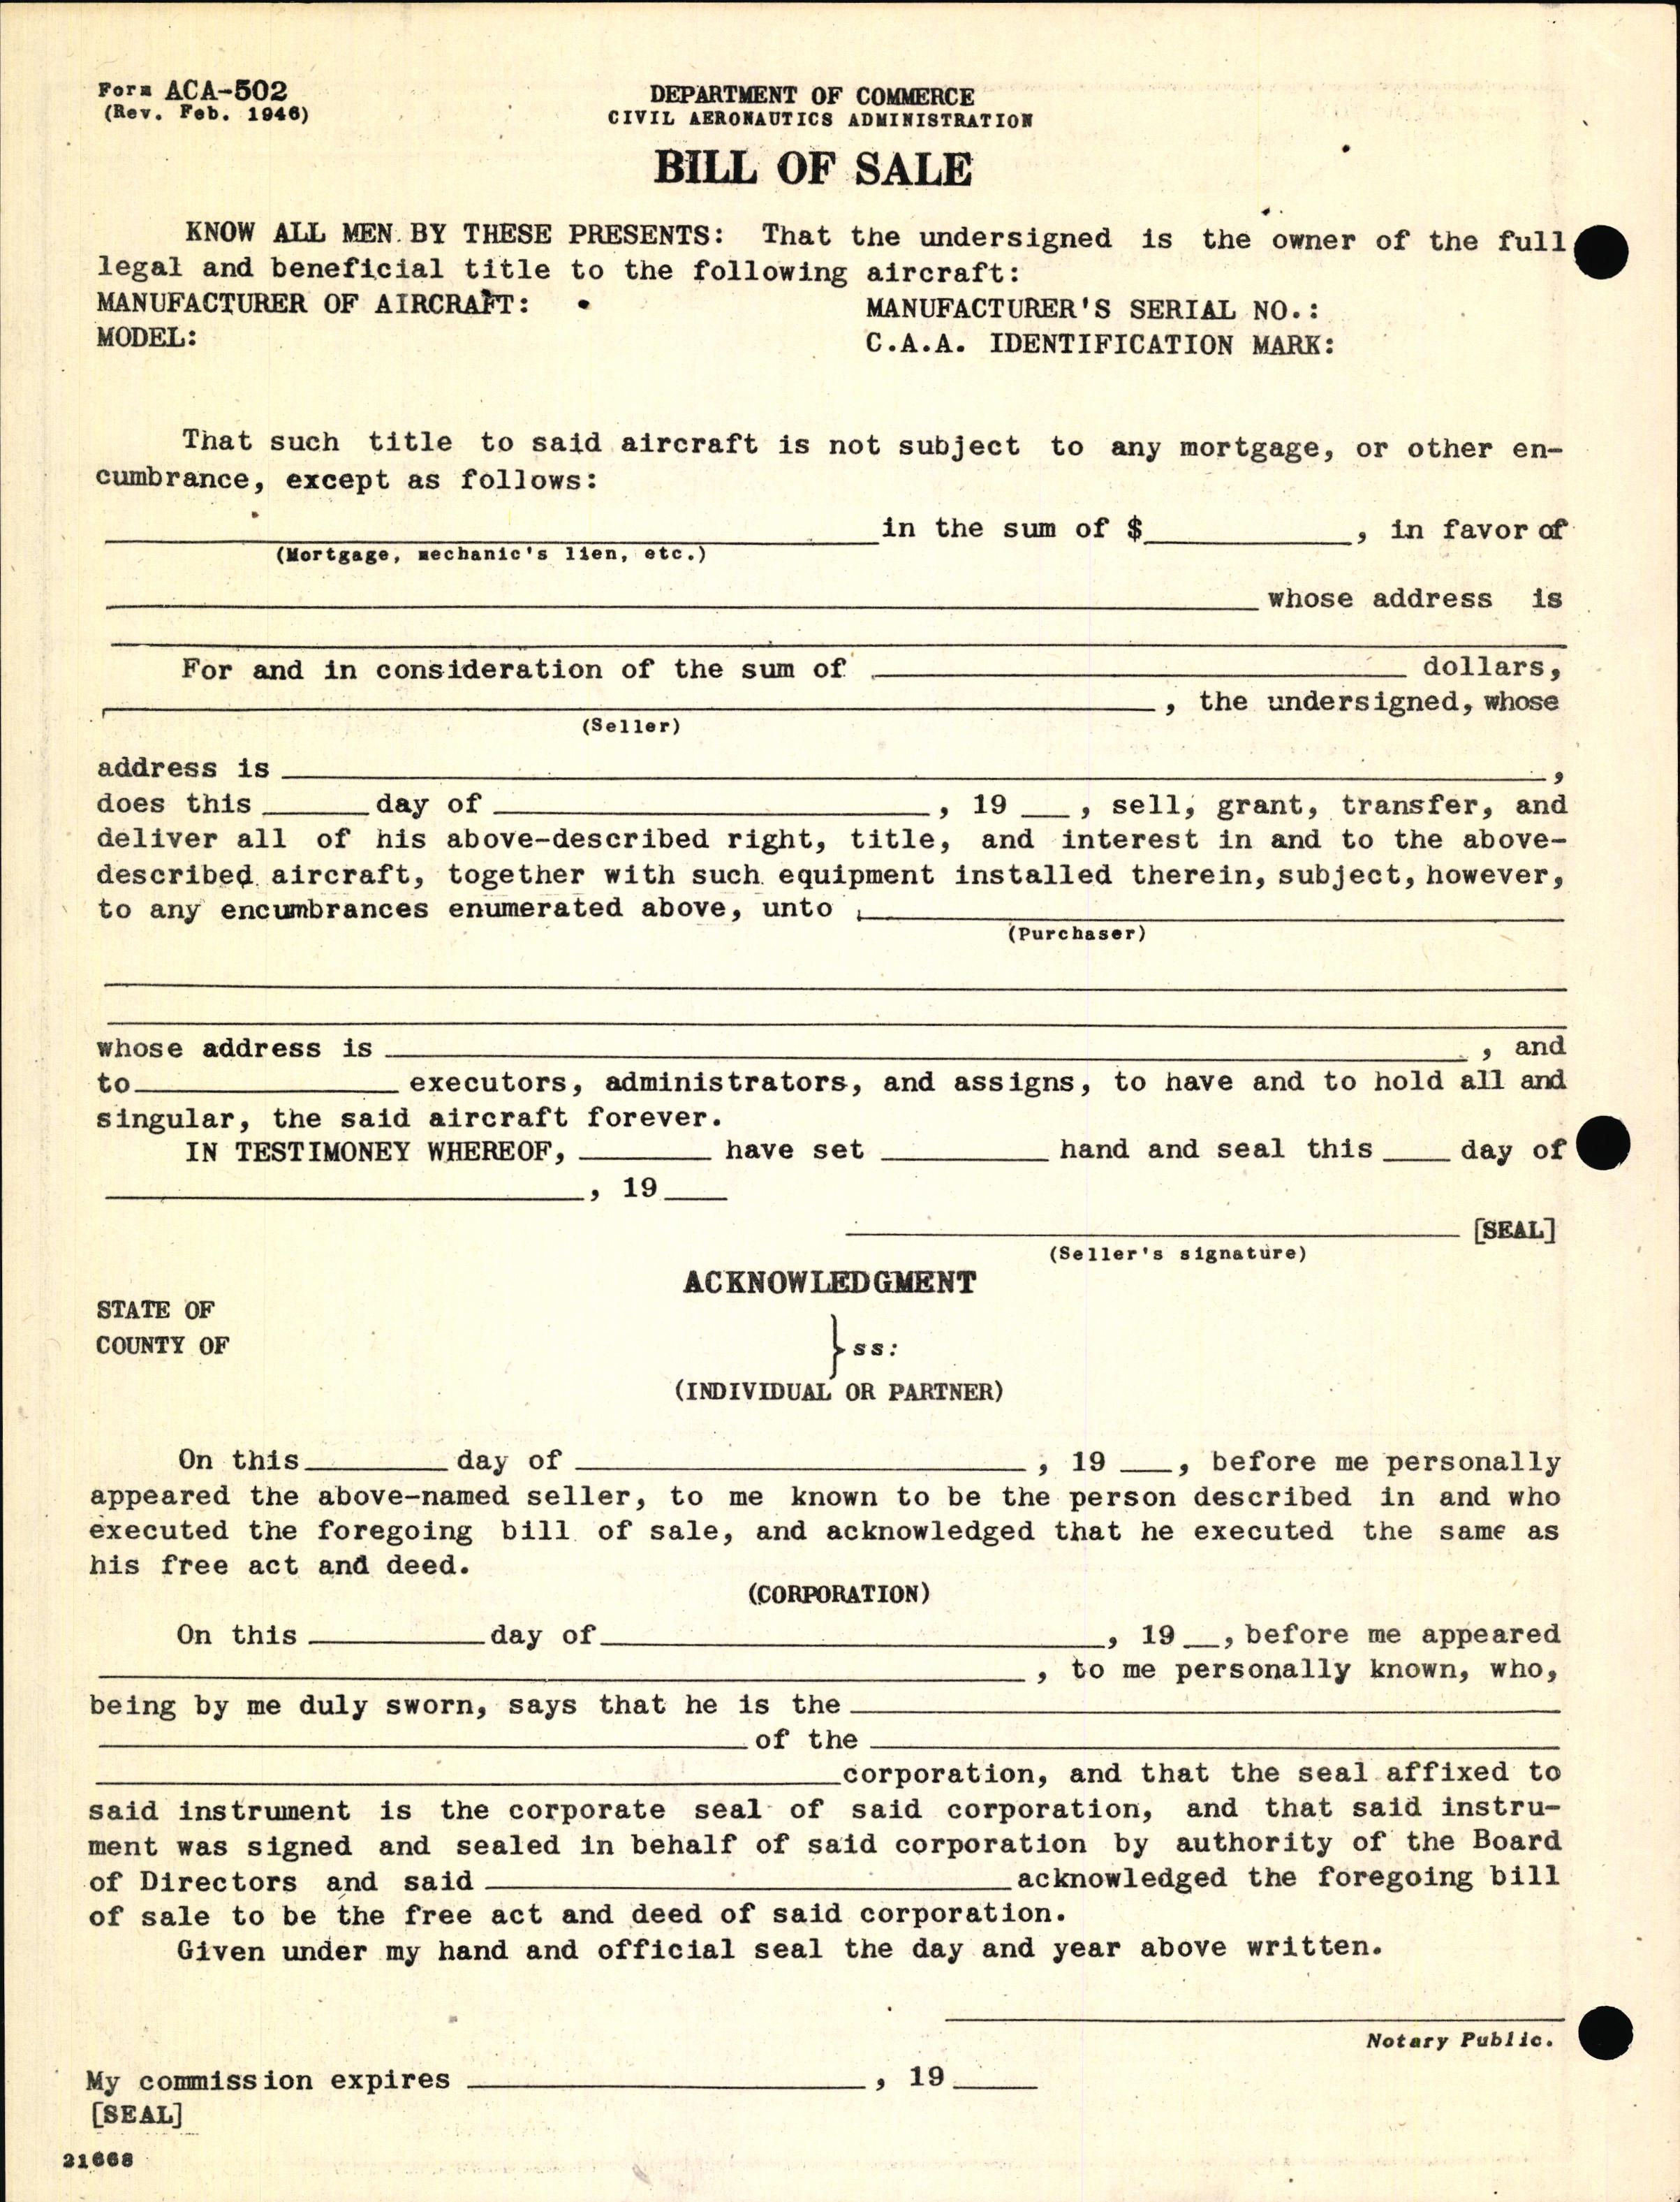 Sample page 2 from AirCorps Library document: Technical Information for Serial Number 2052